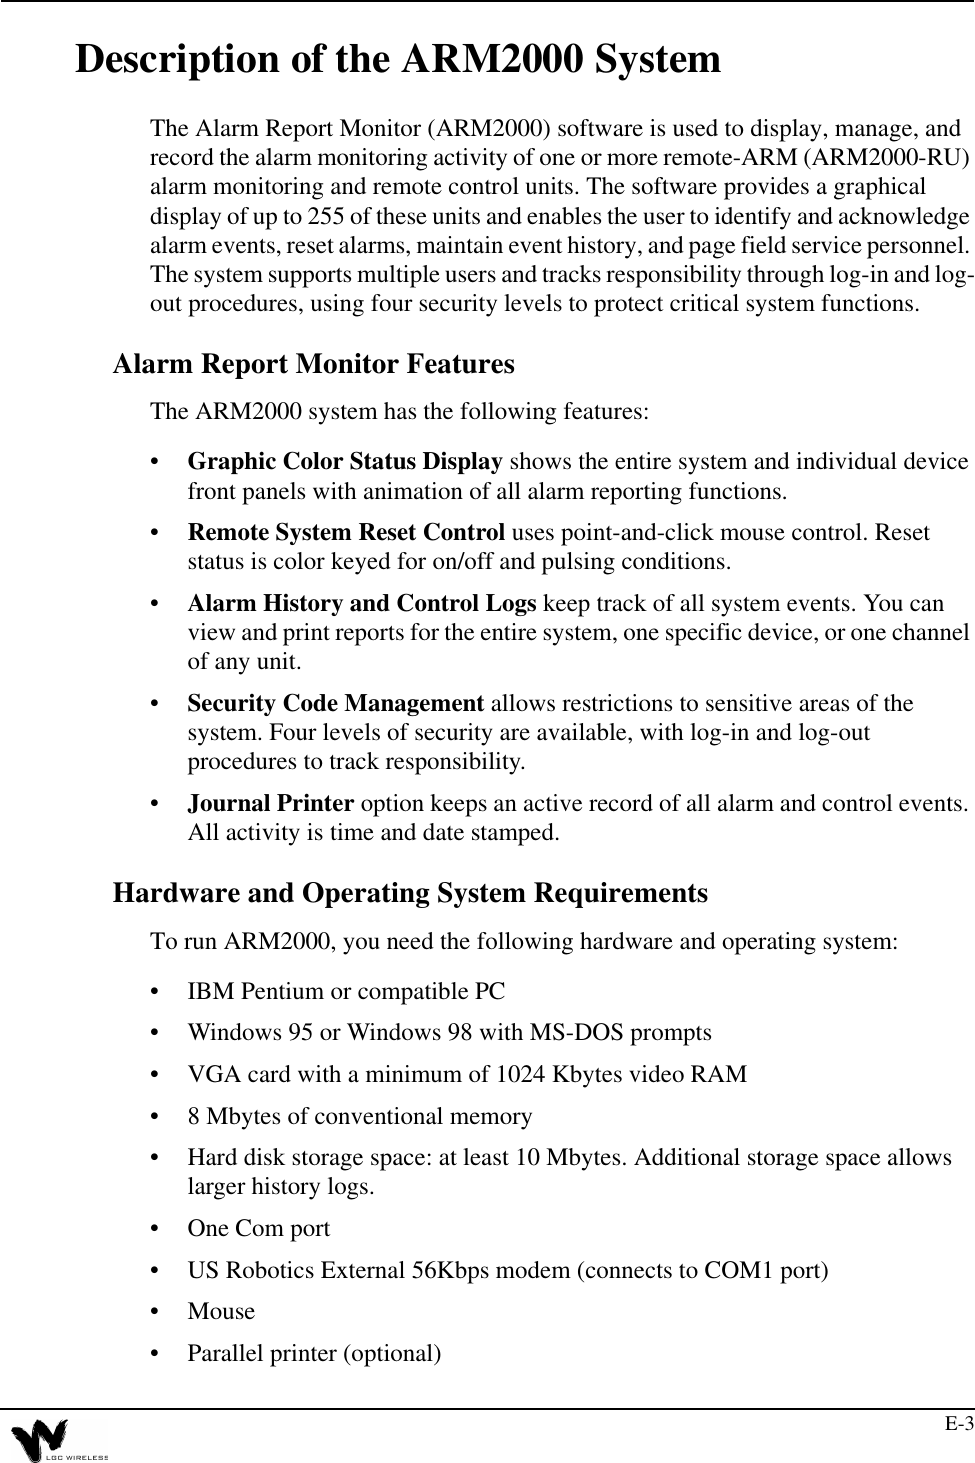 E-3Description of the ARM2000 SystemThe Alarm Report Monitor (ARM2000) software is used to display, manage, and record the alarm monitoring activity of one or more remote-ARM (ARM2000-RU) alarm monitoring and remote control units. The software provides a graphical display of up to 255 of these units and enables the user to identify and acknowledge alarm events, reset alarms, maintain event history, and page field service personnel. The system supports multiple users and tracks responsibility through log-in and log-out procedures, using four security levels to protect critical system functions.Alarm Report Monitor FeaturesThe ARM2000 system has the following features:•Graphic Color Status Display shows the entire system and individual device front panels with animation of all alarm reporting functions.•Remote System Reset Control uses point-and-click mouse control. Reset status is color keyed for on/off and pulsing conditions. •Alarm History and Control Logs keep track of all system events. You can view and print reports for the entire system, one specific device, or one channel of any unit.•Security Code Management allows restrictions to sensitive areas of the system. Four levels of security are available, with log-in and log-out procedures to track responsibility.•Journal Printer option keeps an active record of all alarm and control events. All activity is time and date stamped.Hardware and Operating System RequirementsTo run ARM2000, you need the following hardware and operating system:•IBM Pentium or compatible PC •Windows 95 or Windows 98 with MS-DOS prompts •VGA card with a minimum of 1024 Kbytes video RAM•8 Mbytes of conventional memory•Hard disk storage space: at least 10 Mbytes. Additional storage space allows larger history logs.•One Com port•US Robotics External 56Kbps modem (connects to COM1 port)•Mouse•Parallel printer (optional)